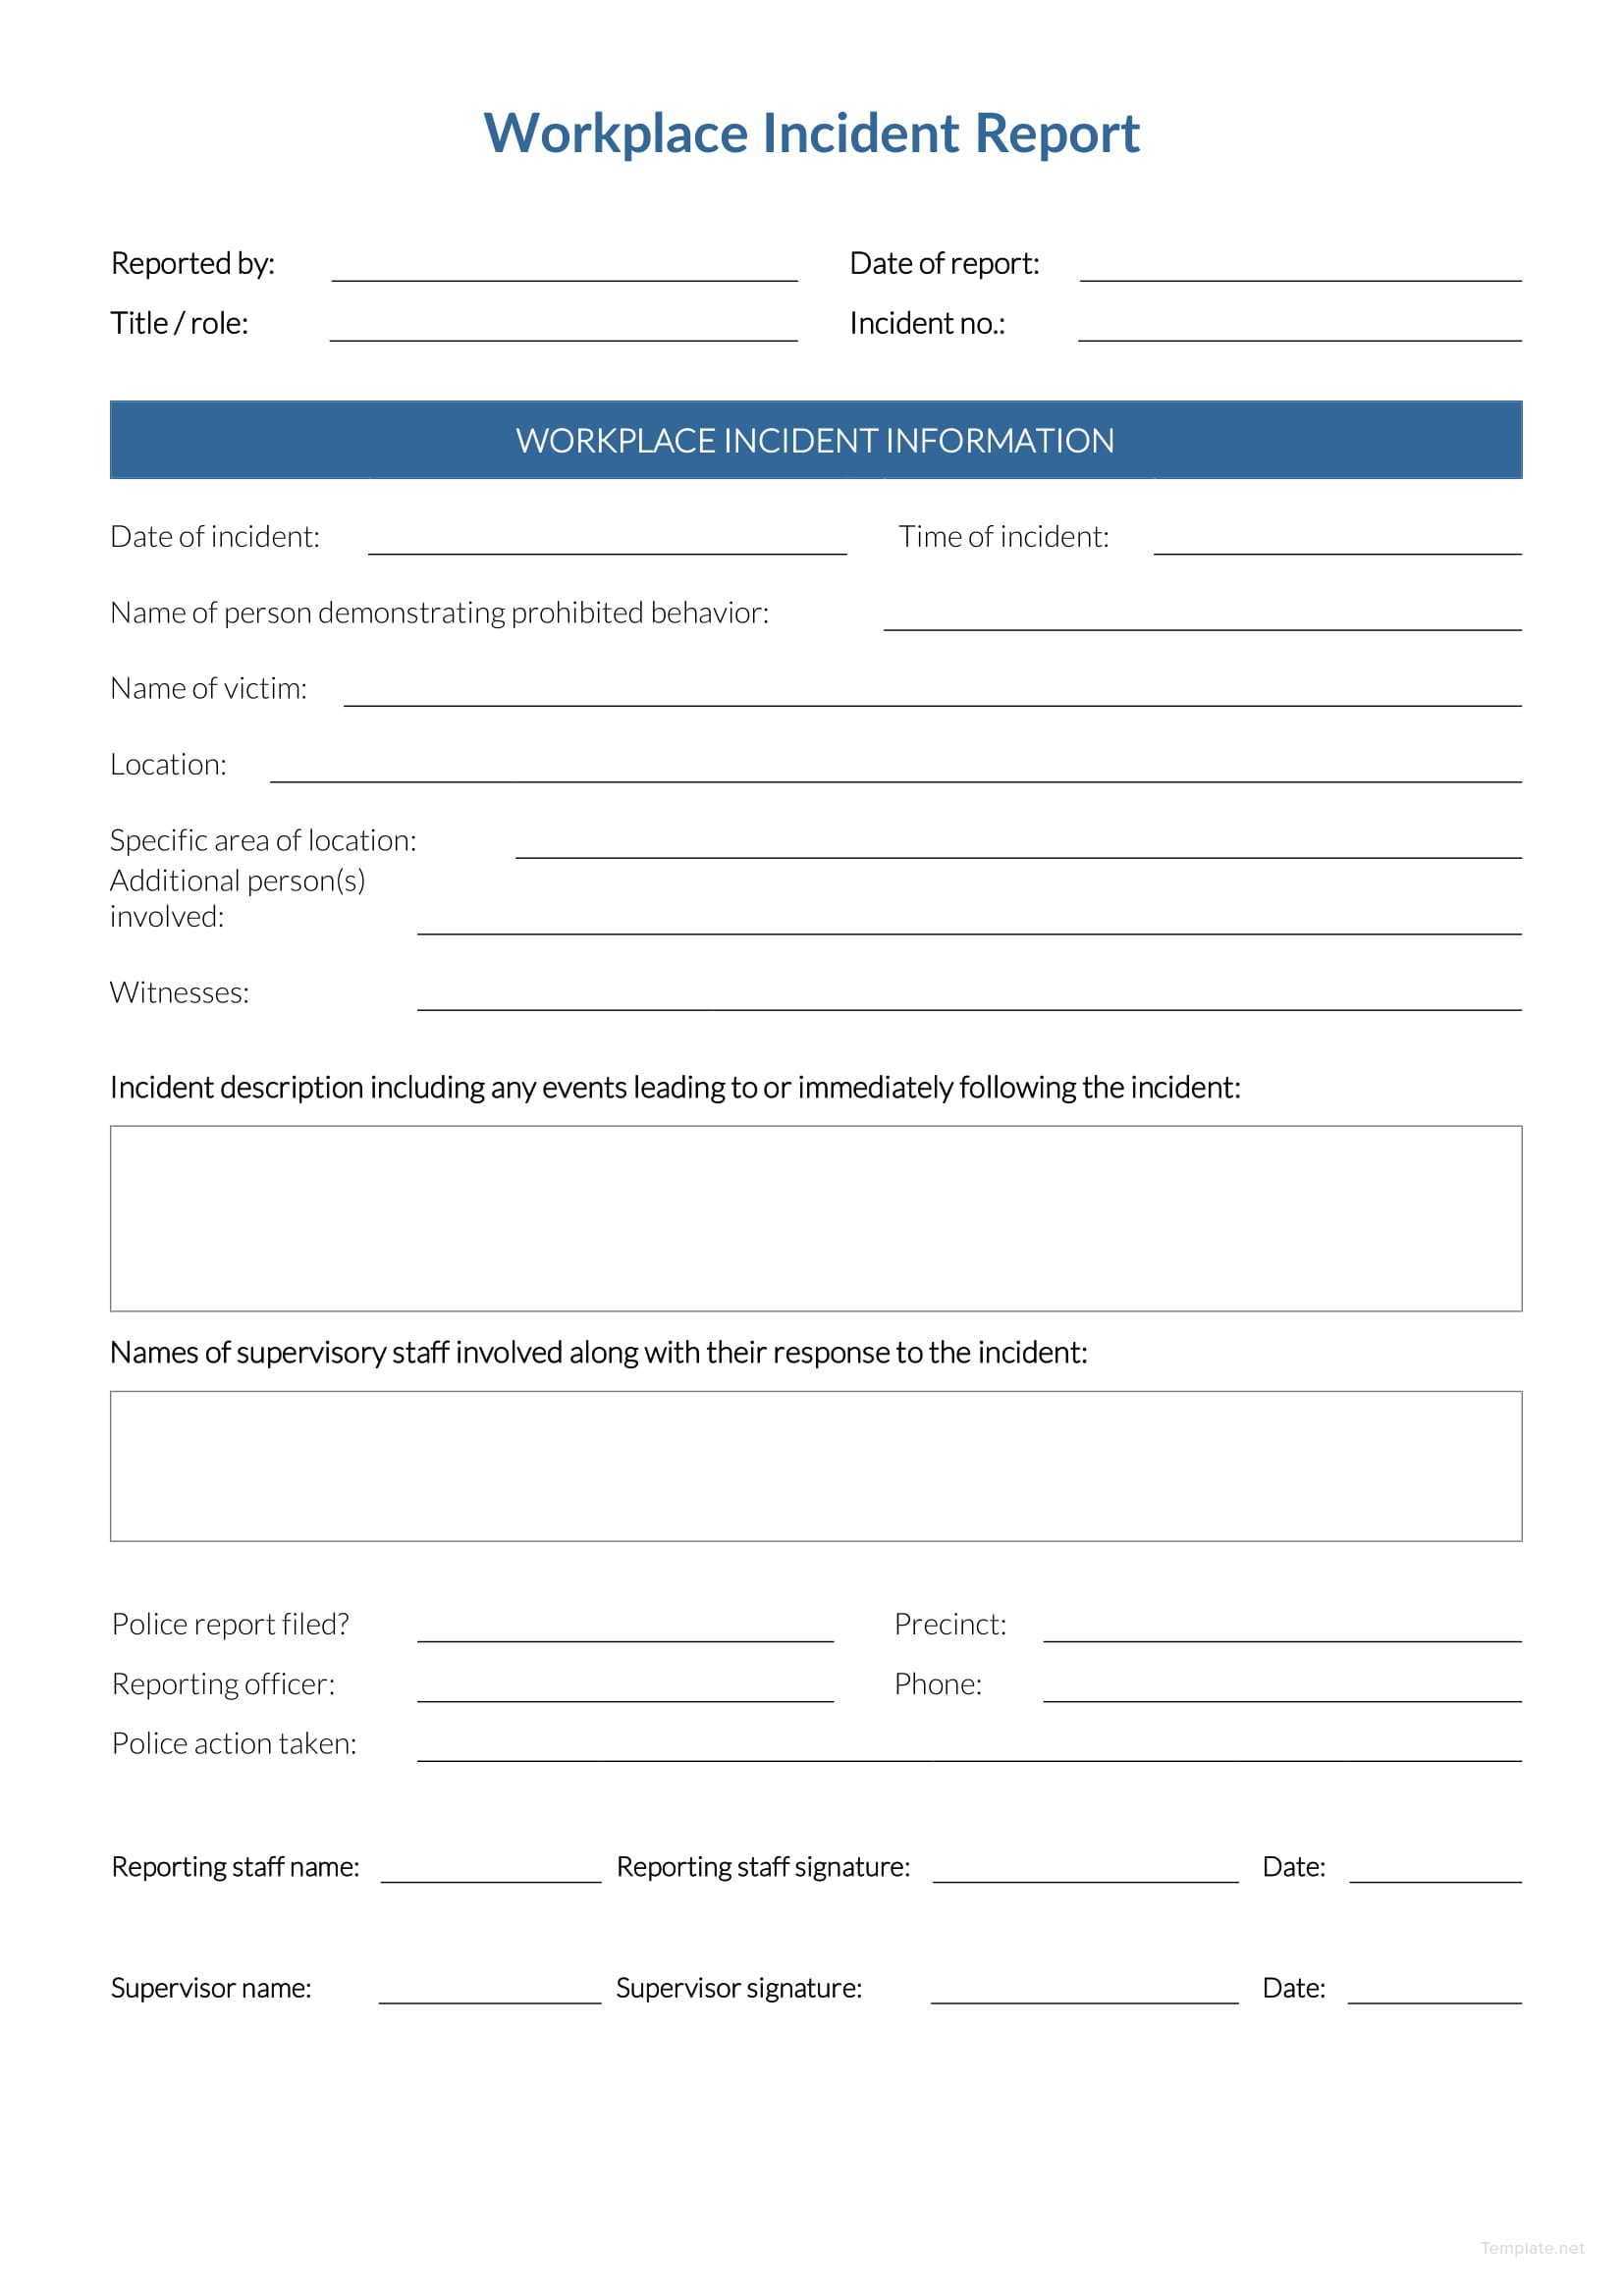 Free Workplace Incident Report | Incident Report, Workplace In Generic Incident Report Template